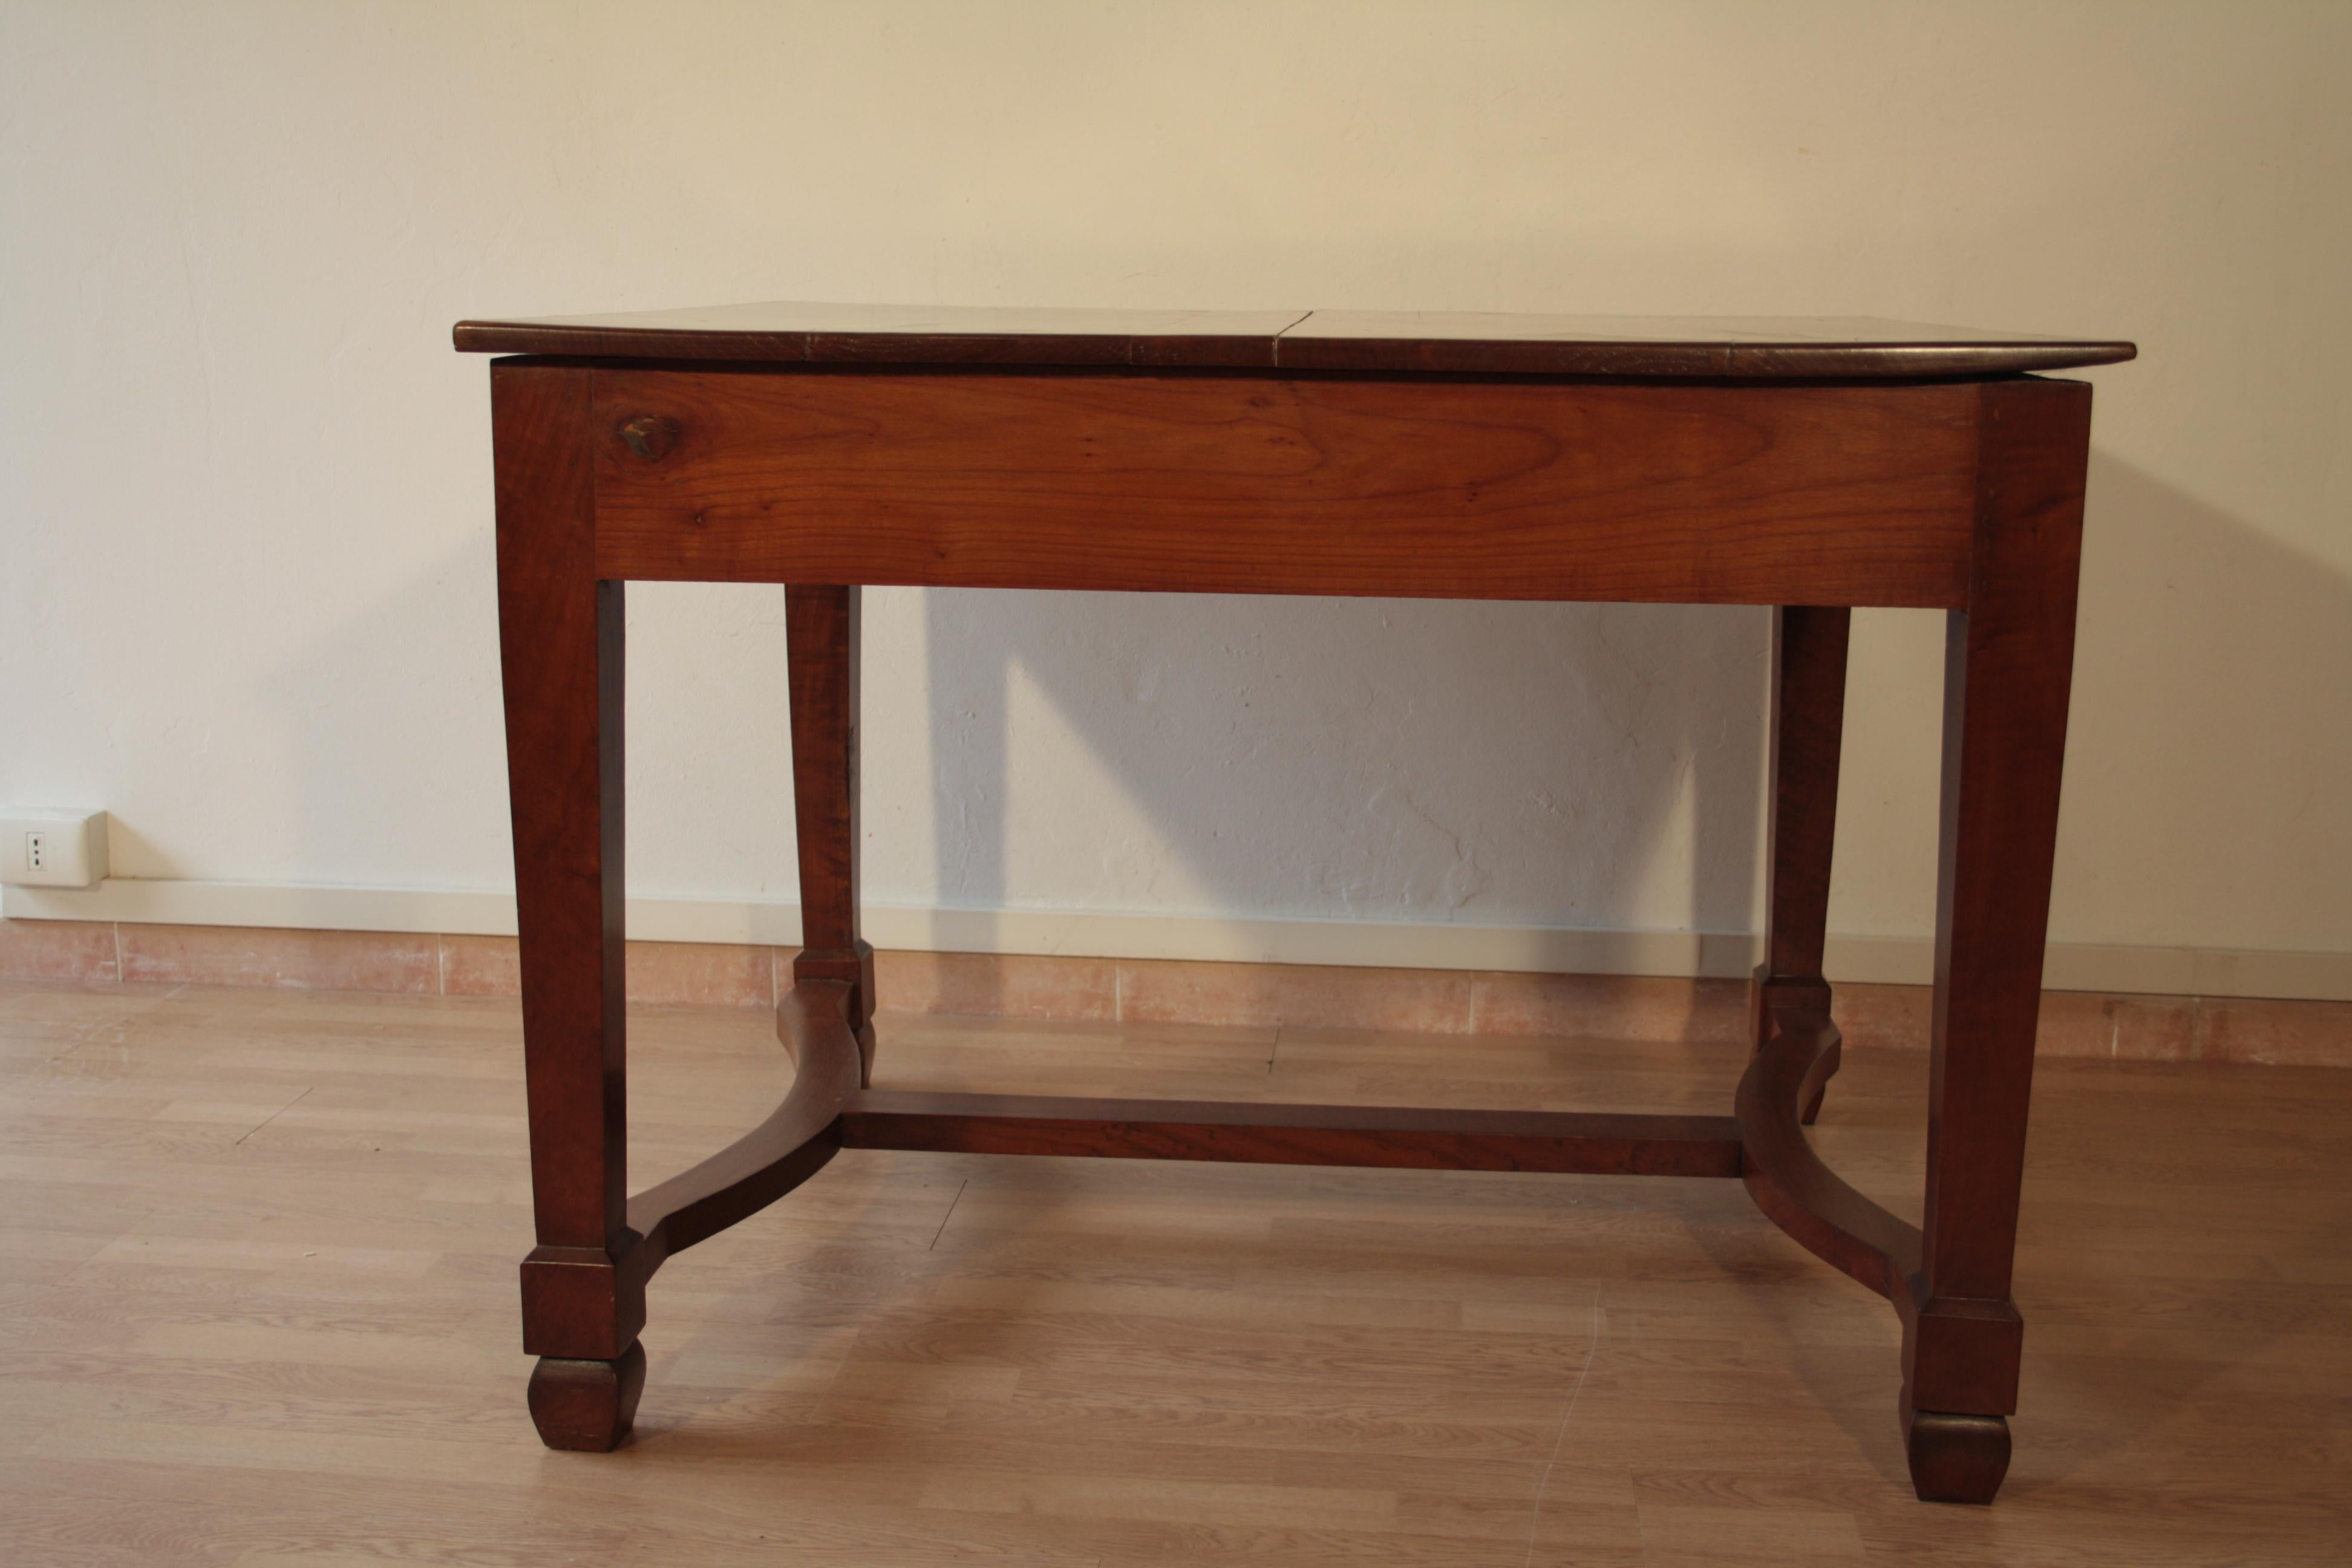 Solid wood table

Object: Extendable table
Style: Liberty
Origin: Southern Italy
Description:

Solid wood dining table. Solid and well built, this pleasant table is in excellent storage conditions. No presence of wood insects, it is intact in all